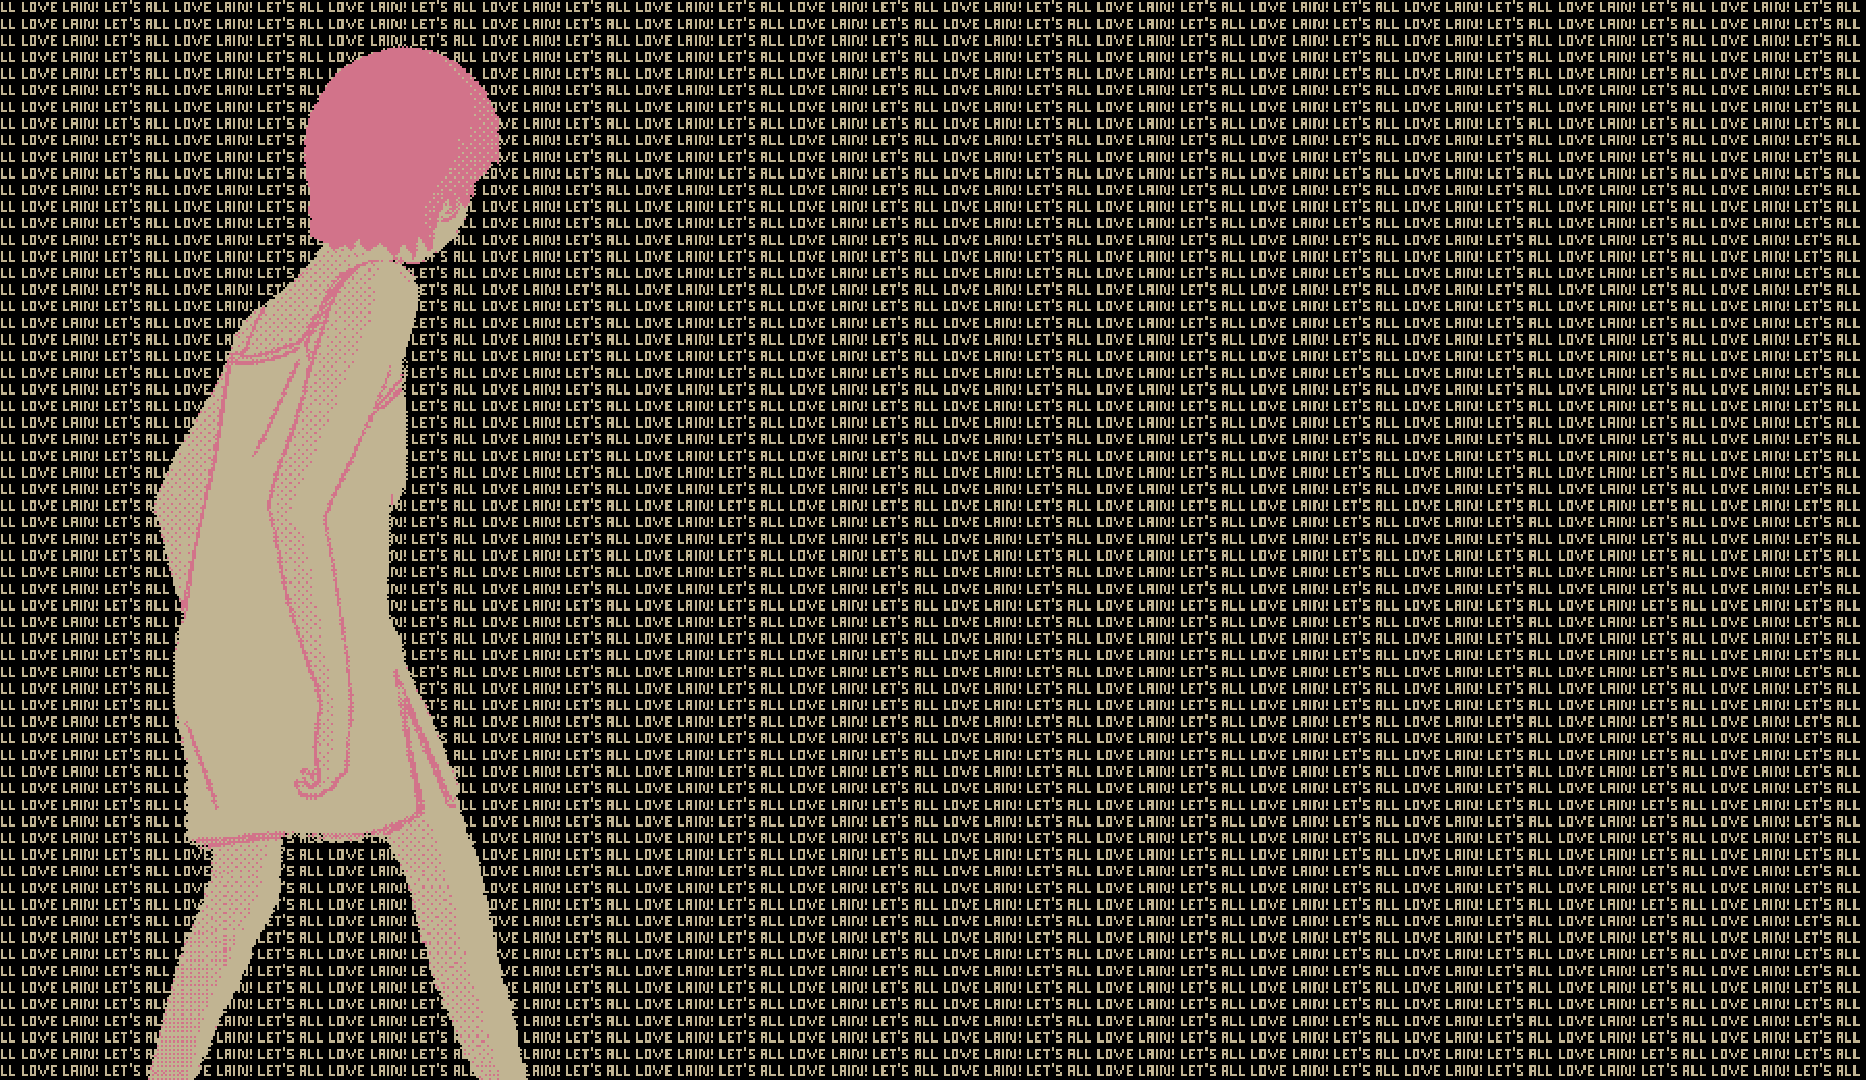 Anime Girls Wired Sounds For Wired People 1866x1080